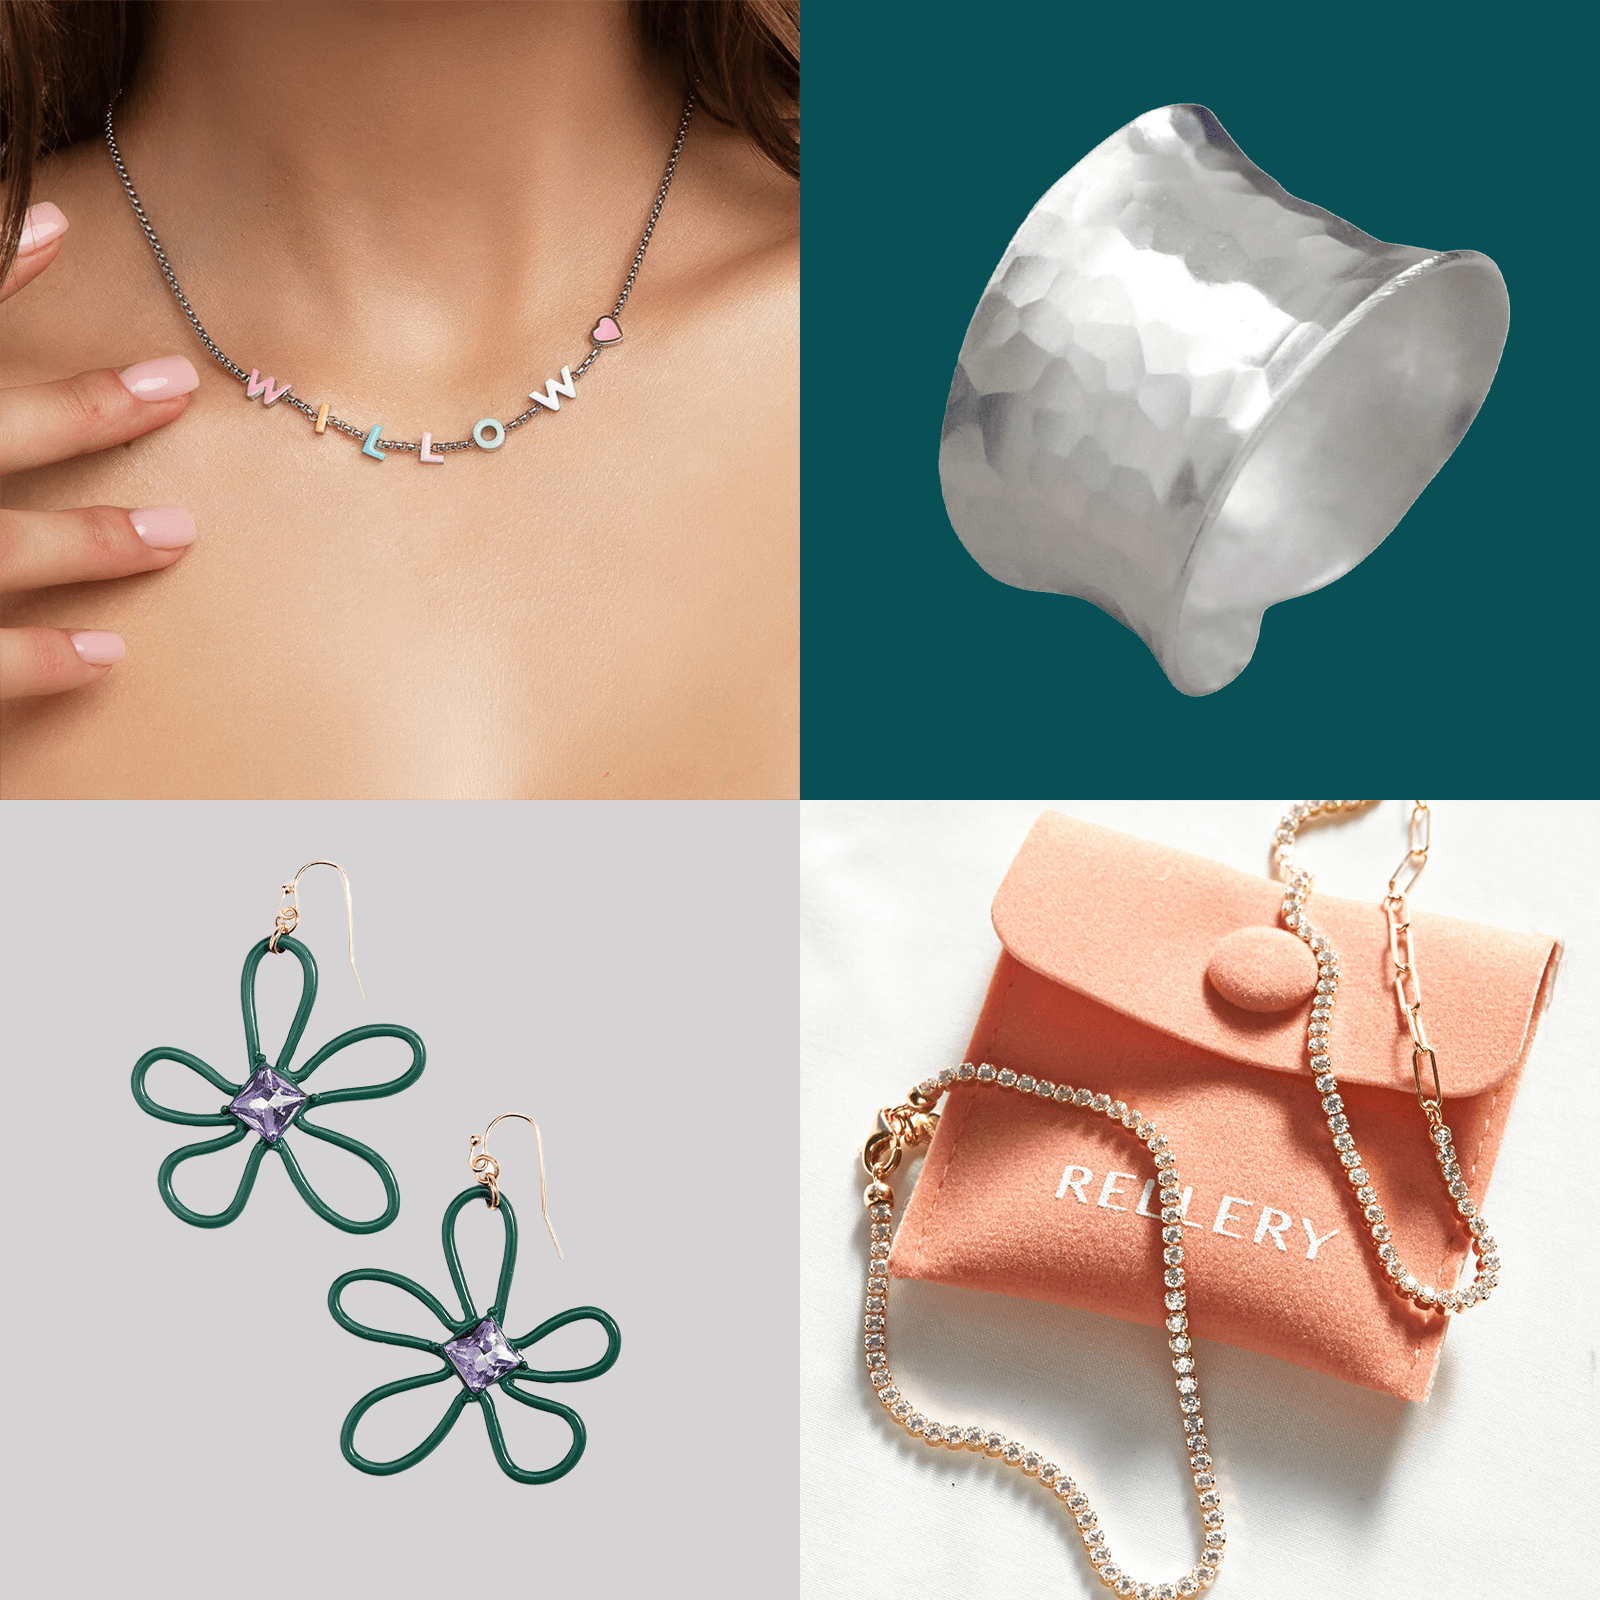 Bold Jewelry Trends To Try For Summer 2023